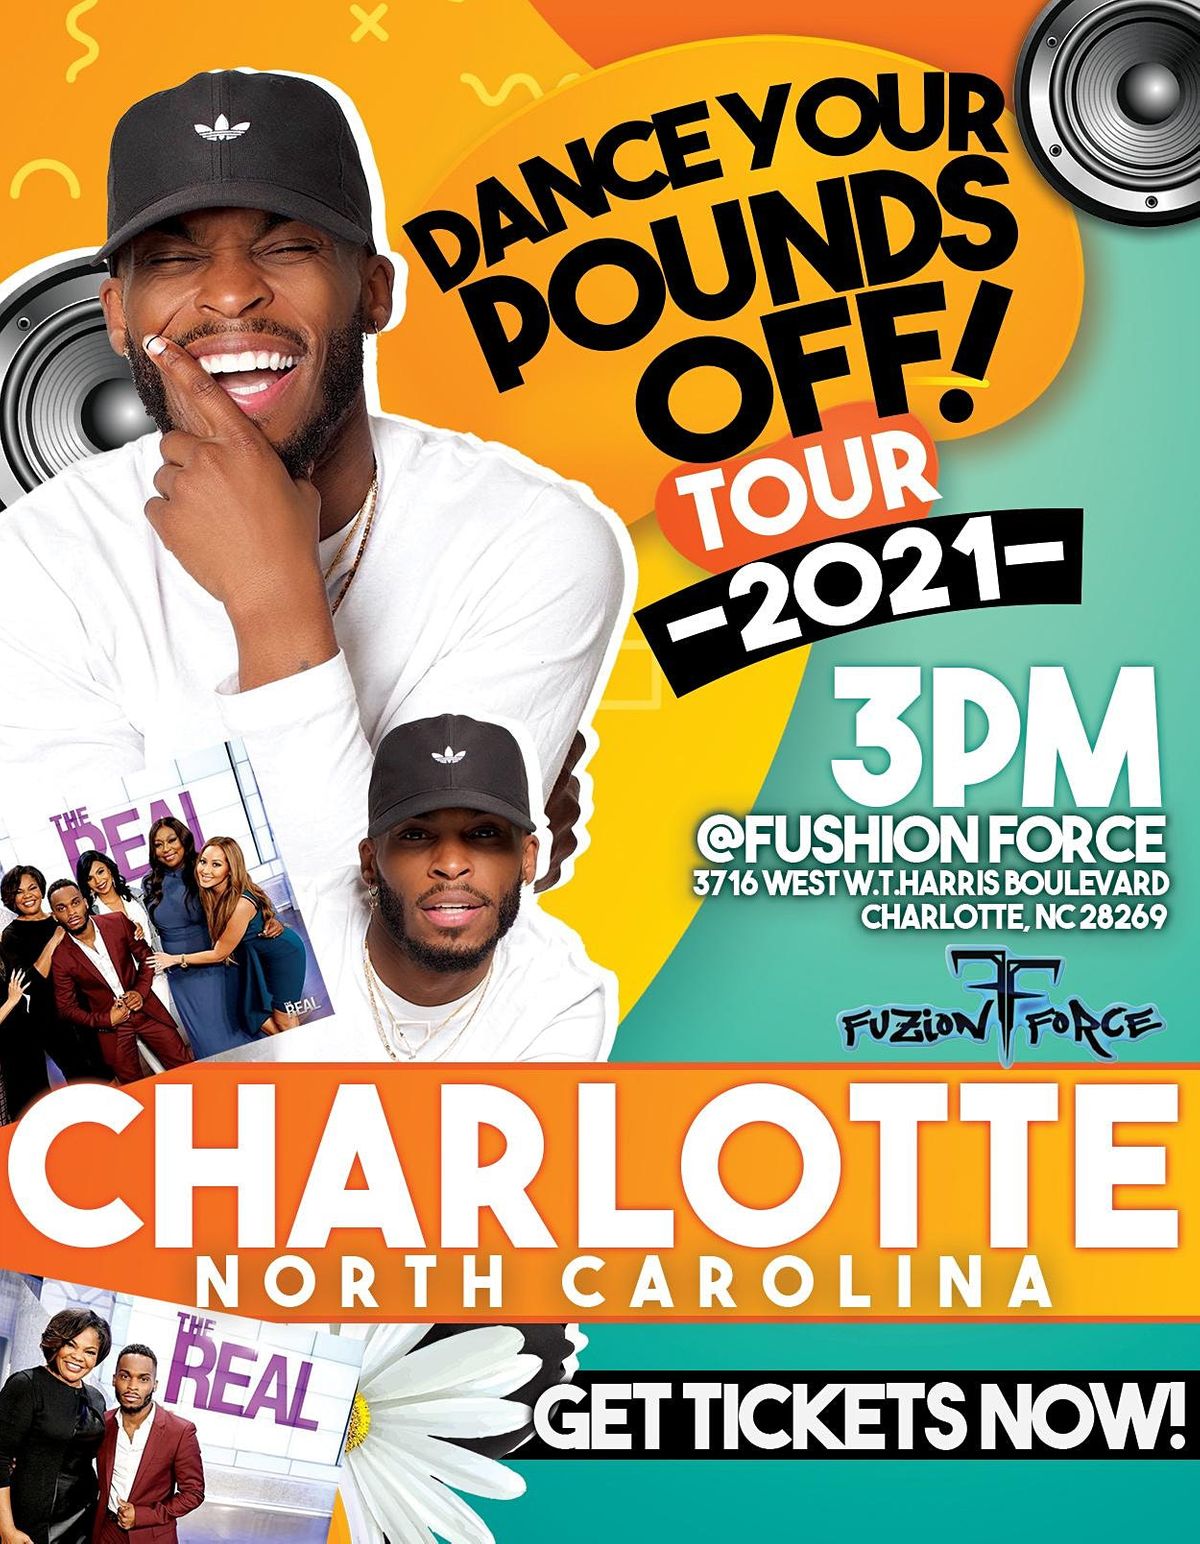 DANCE YOUR POUNDS OFF hits CHARLOTTE,NC!